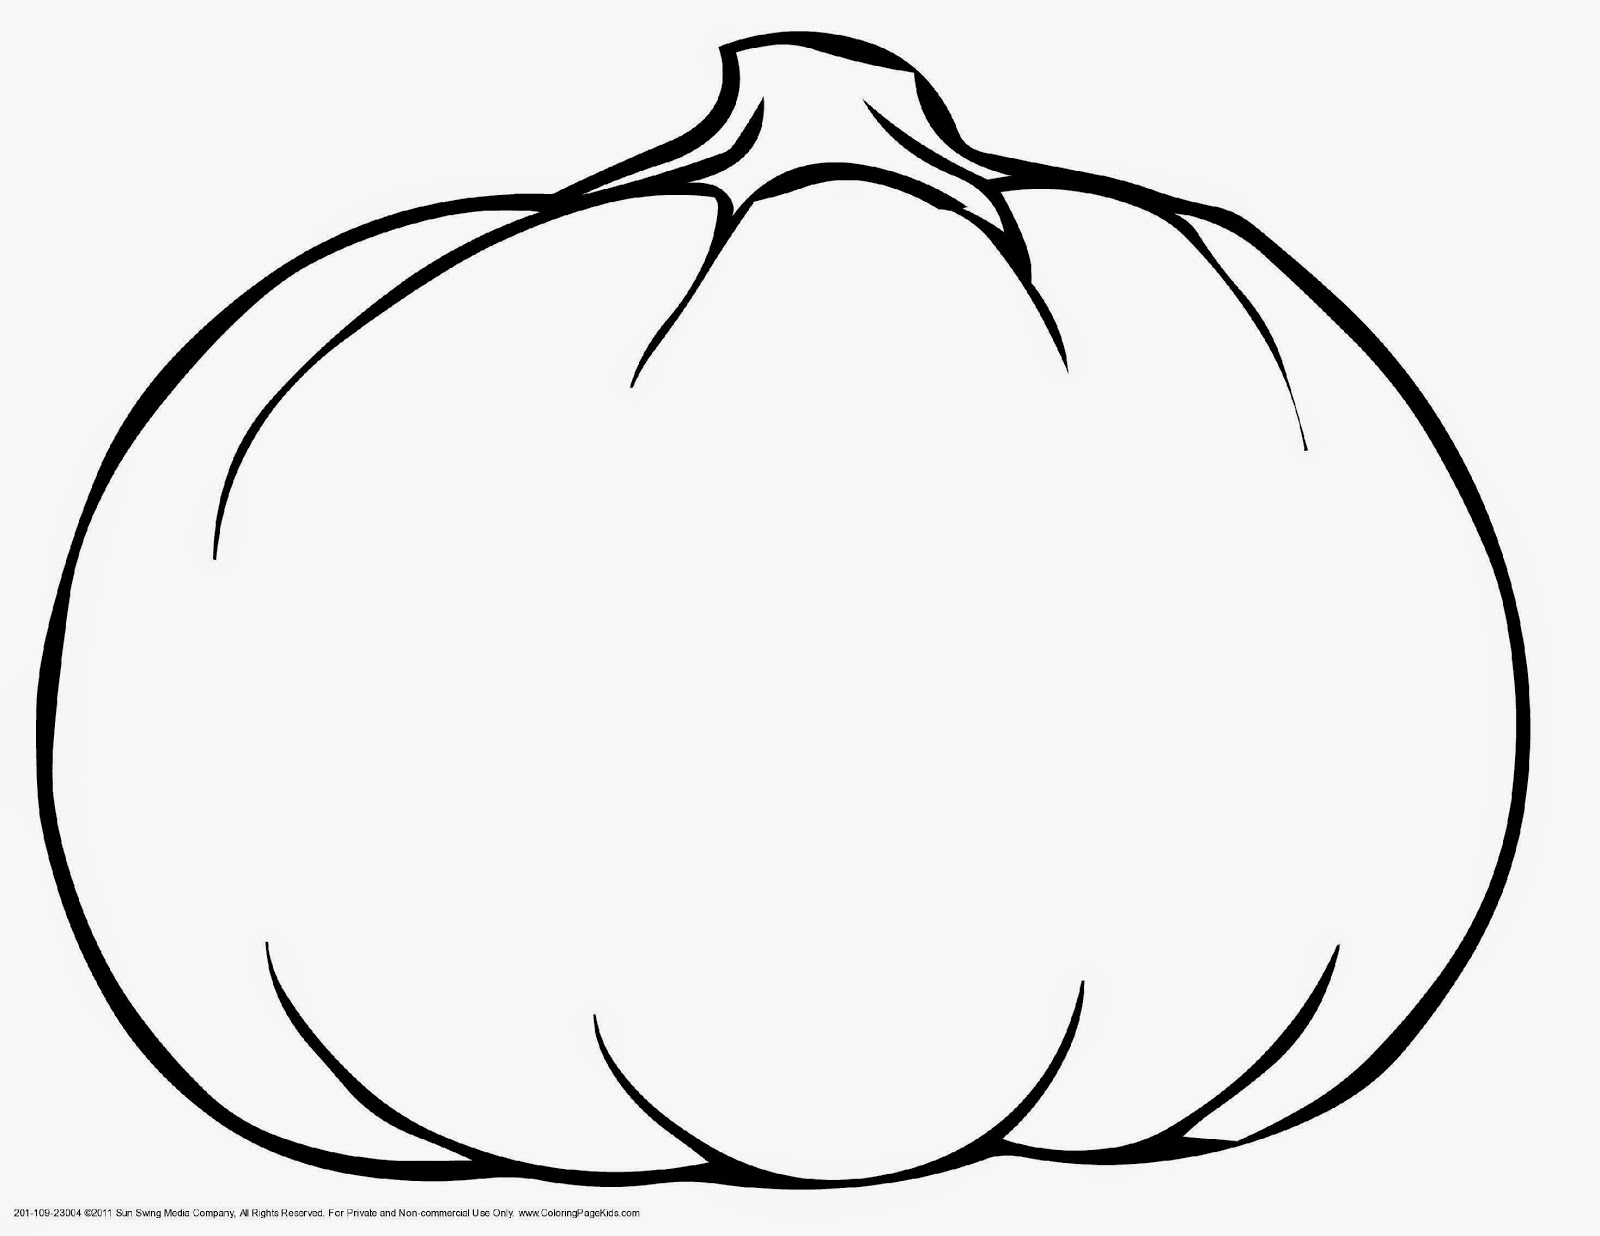 pumpkin-monogram-clipart-black-and-white-20-free-cliparts-download